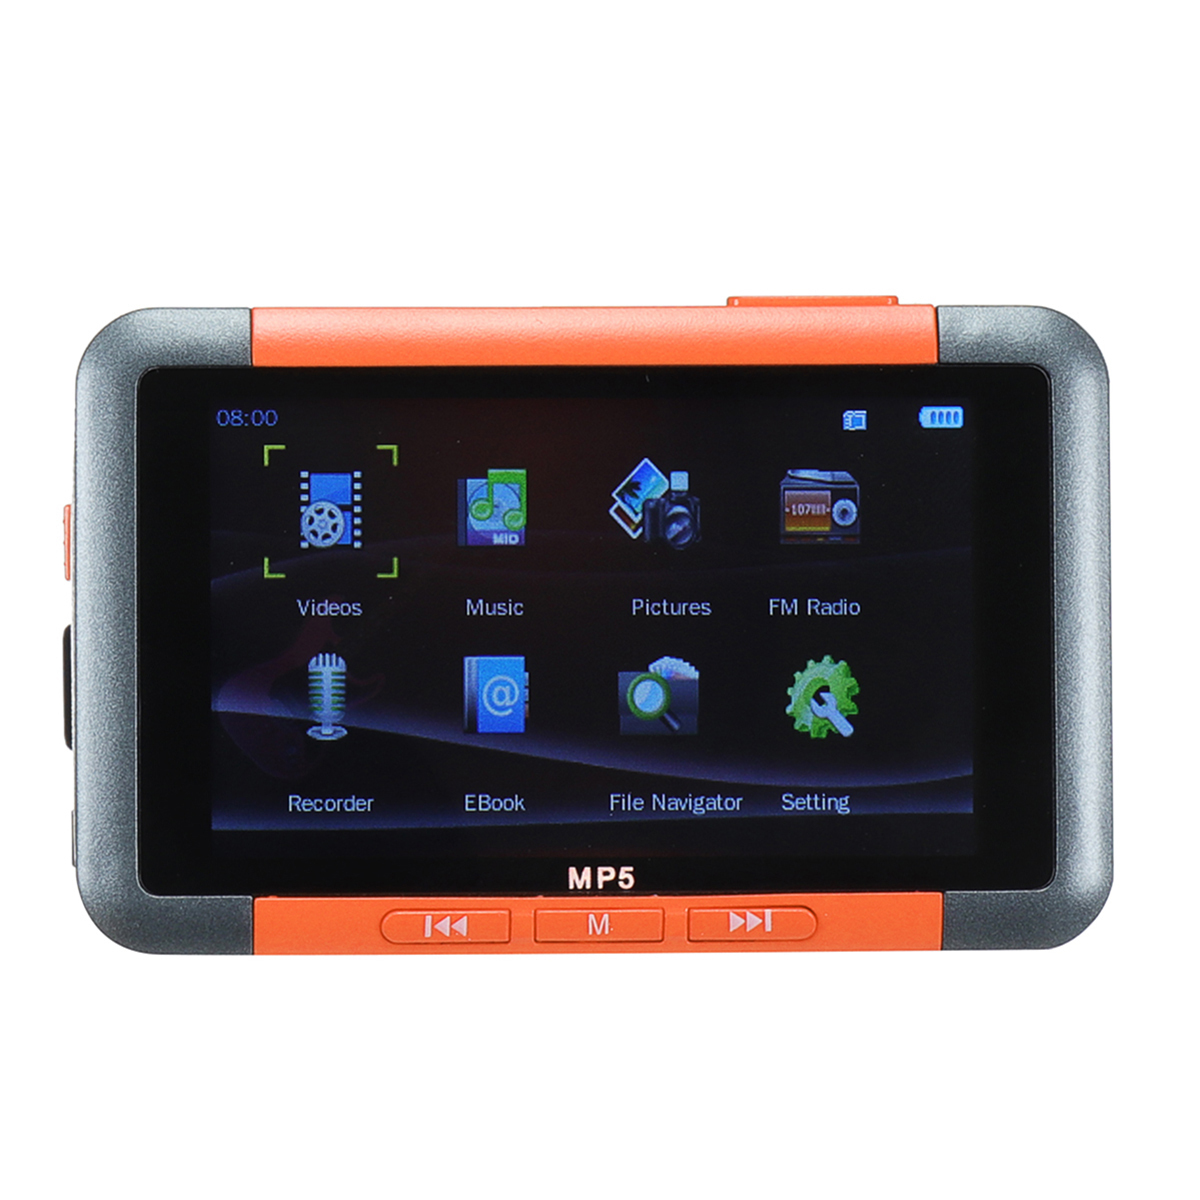 32-GB-MP3-MP4-MP5-Player-Video-Music-Player-30-Inch-Support-FM-TF-Card-With-Headphone-1370715